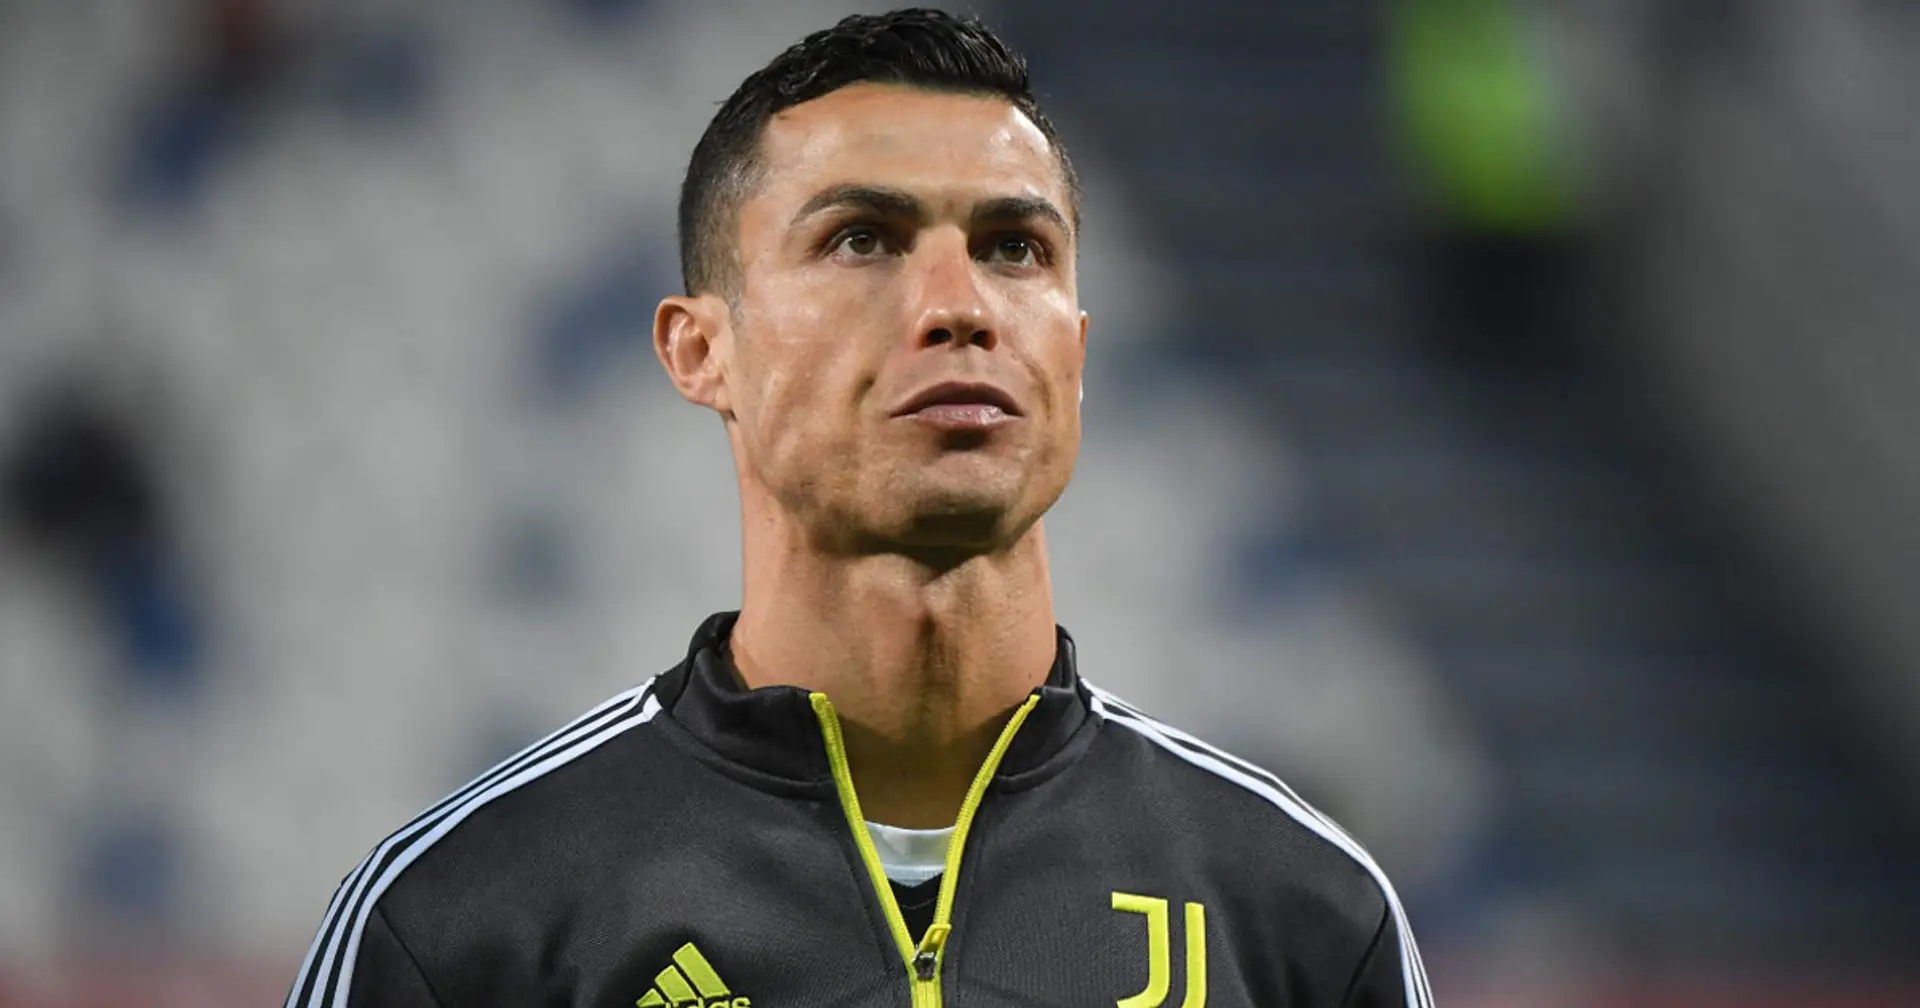 United can meet Ronaldo's wage demands to make him highest-paid player (reliability: 5 stars)